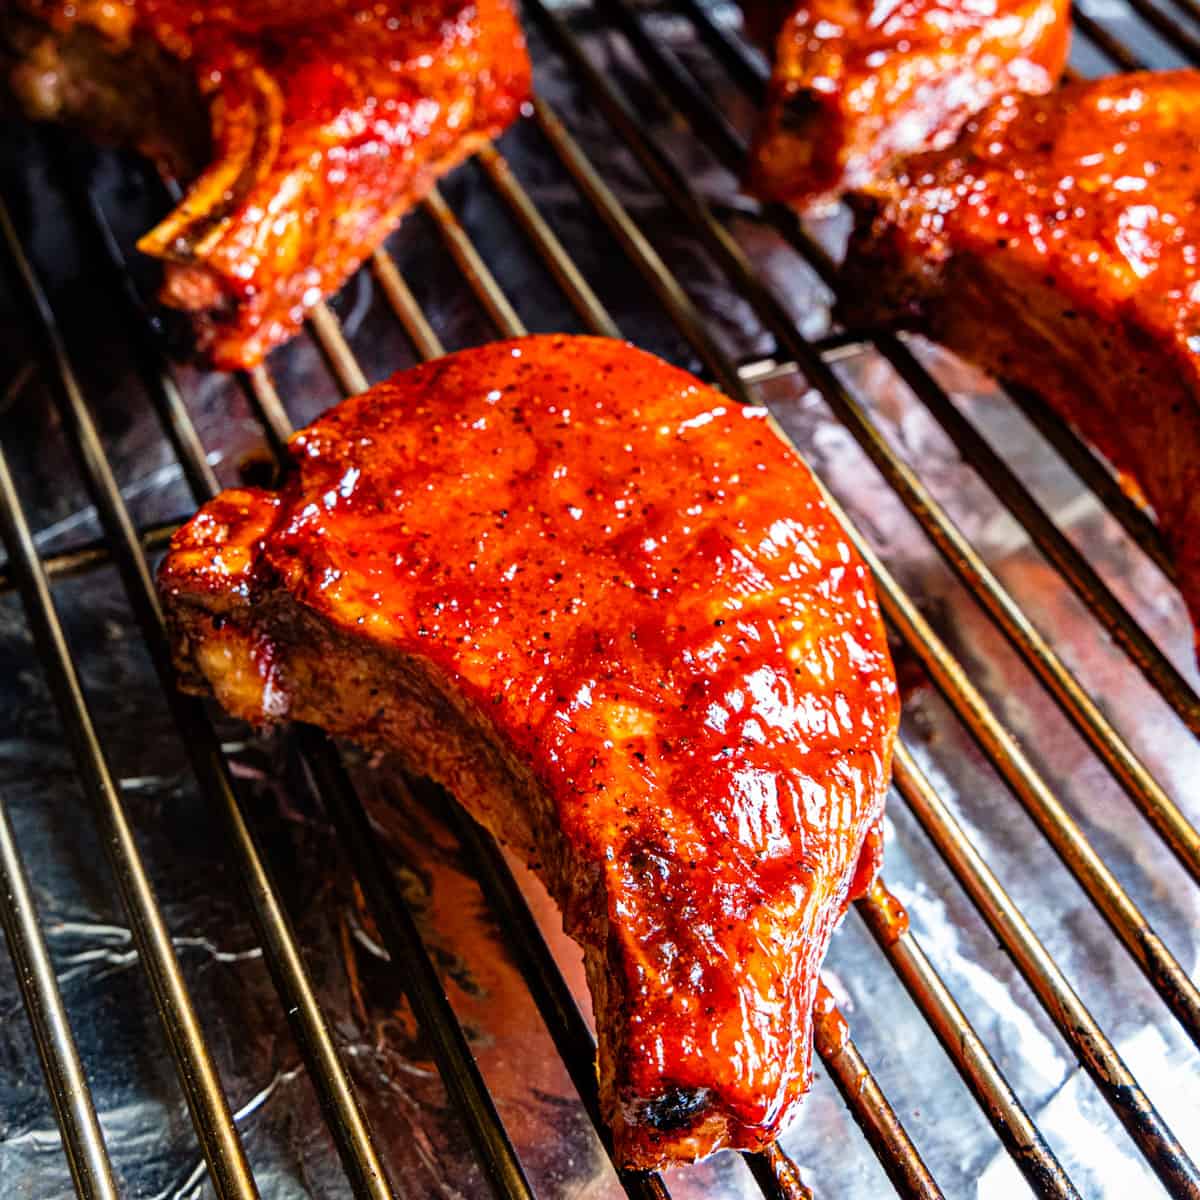 Pork chops on a grill coated with BBQ sauce.